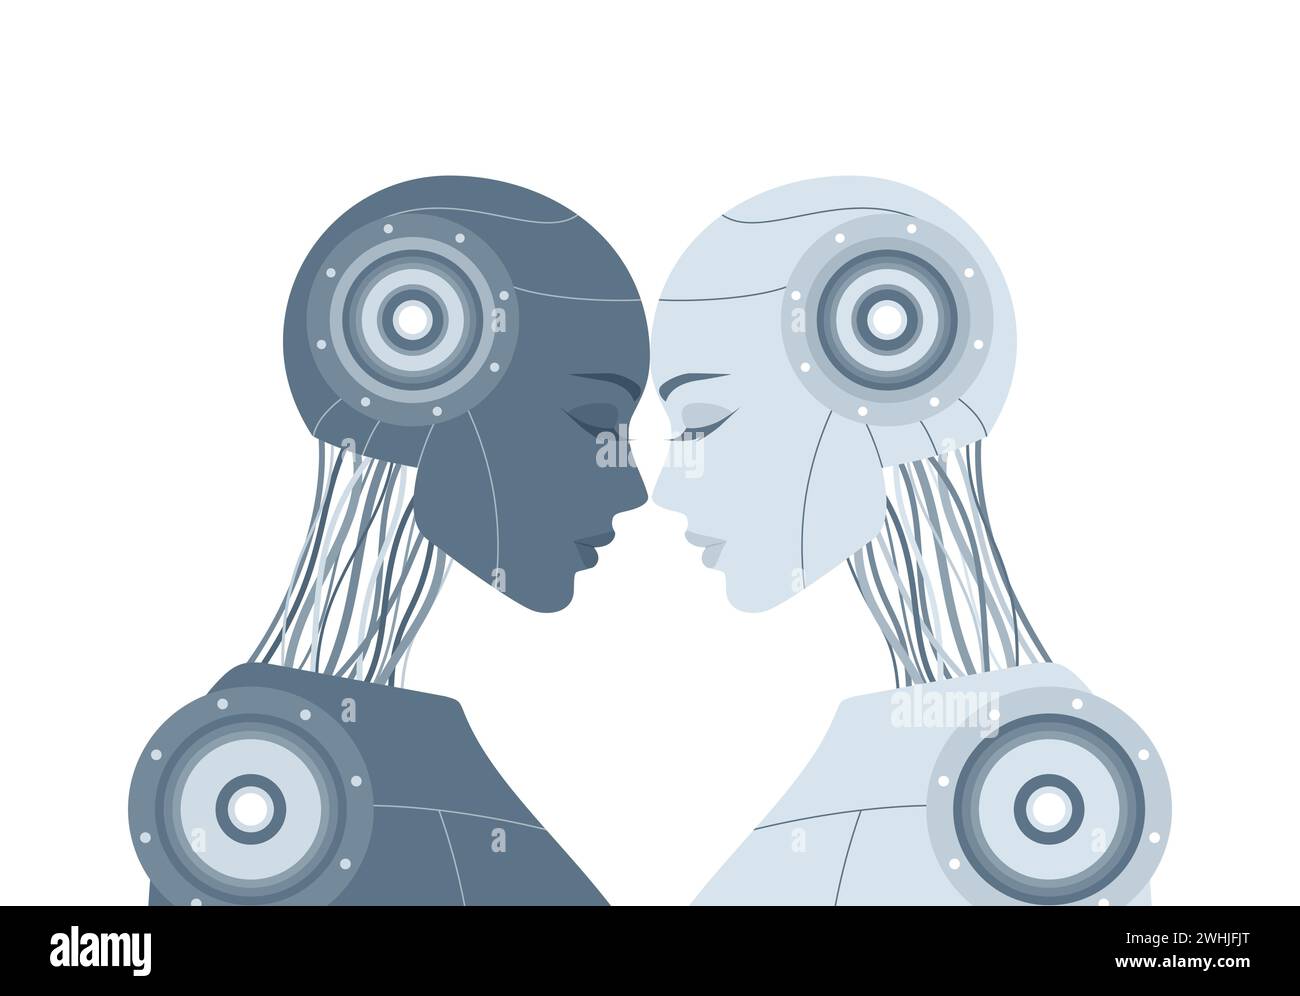 Two humanoid female robots standing together, leaning their foreheads against each other, isolated on a white background. Flat vector illustration Stock Vector